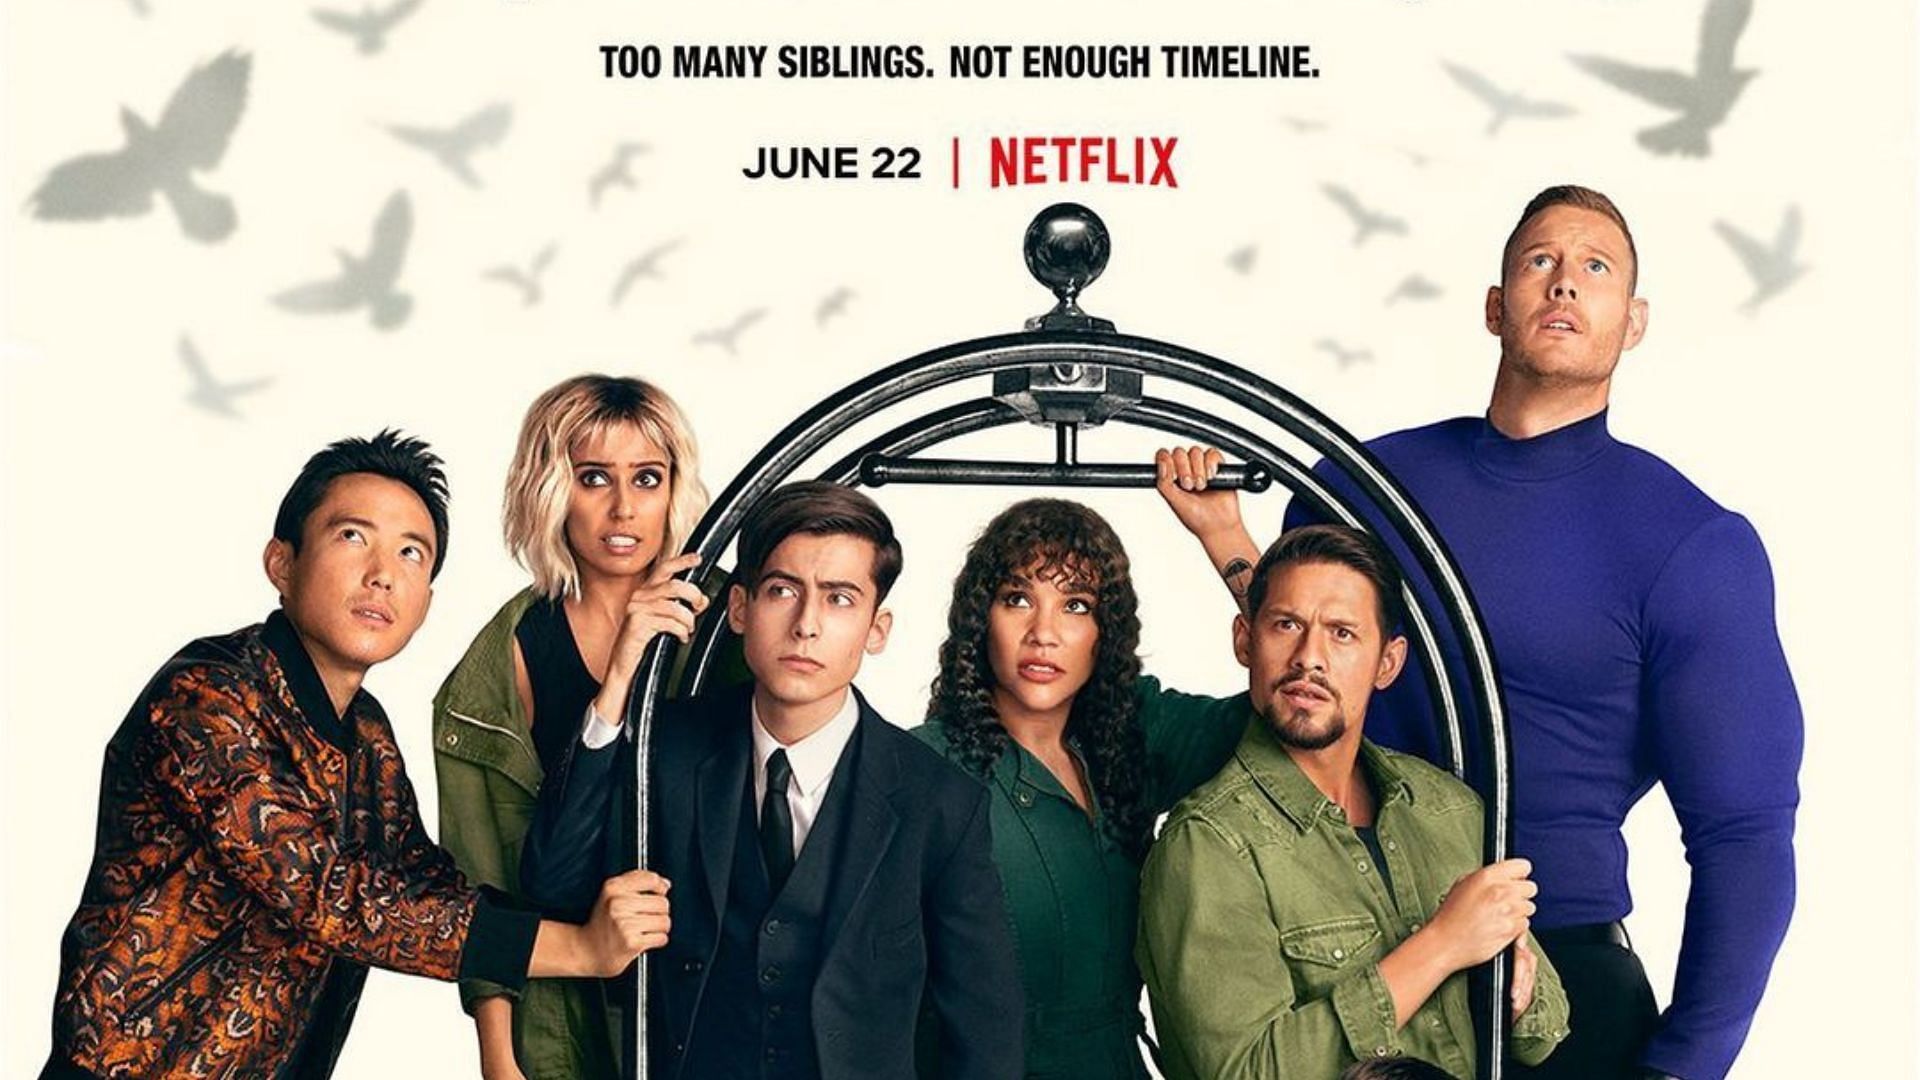 The show is all set to air this June 22, 2022, on Netflix (Image Via umbrellaacad/Instagram)